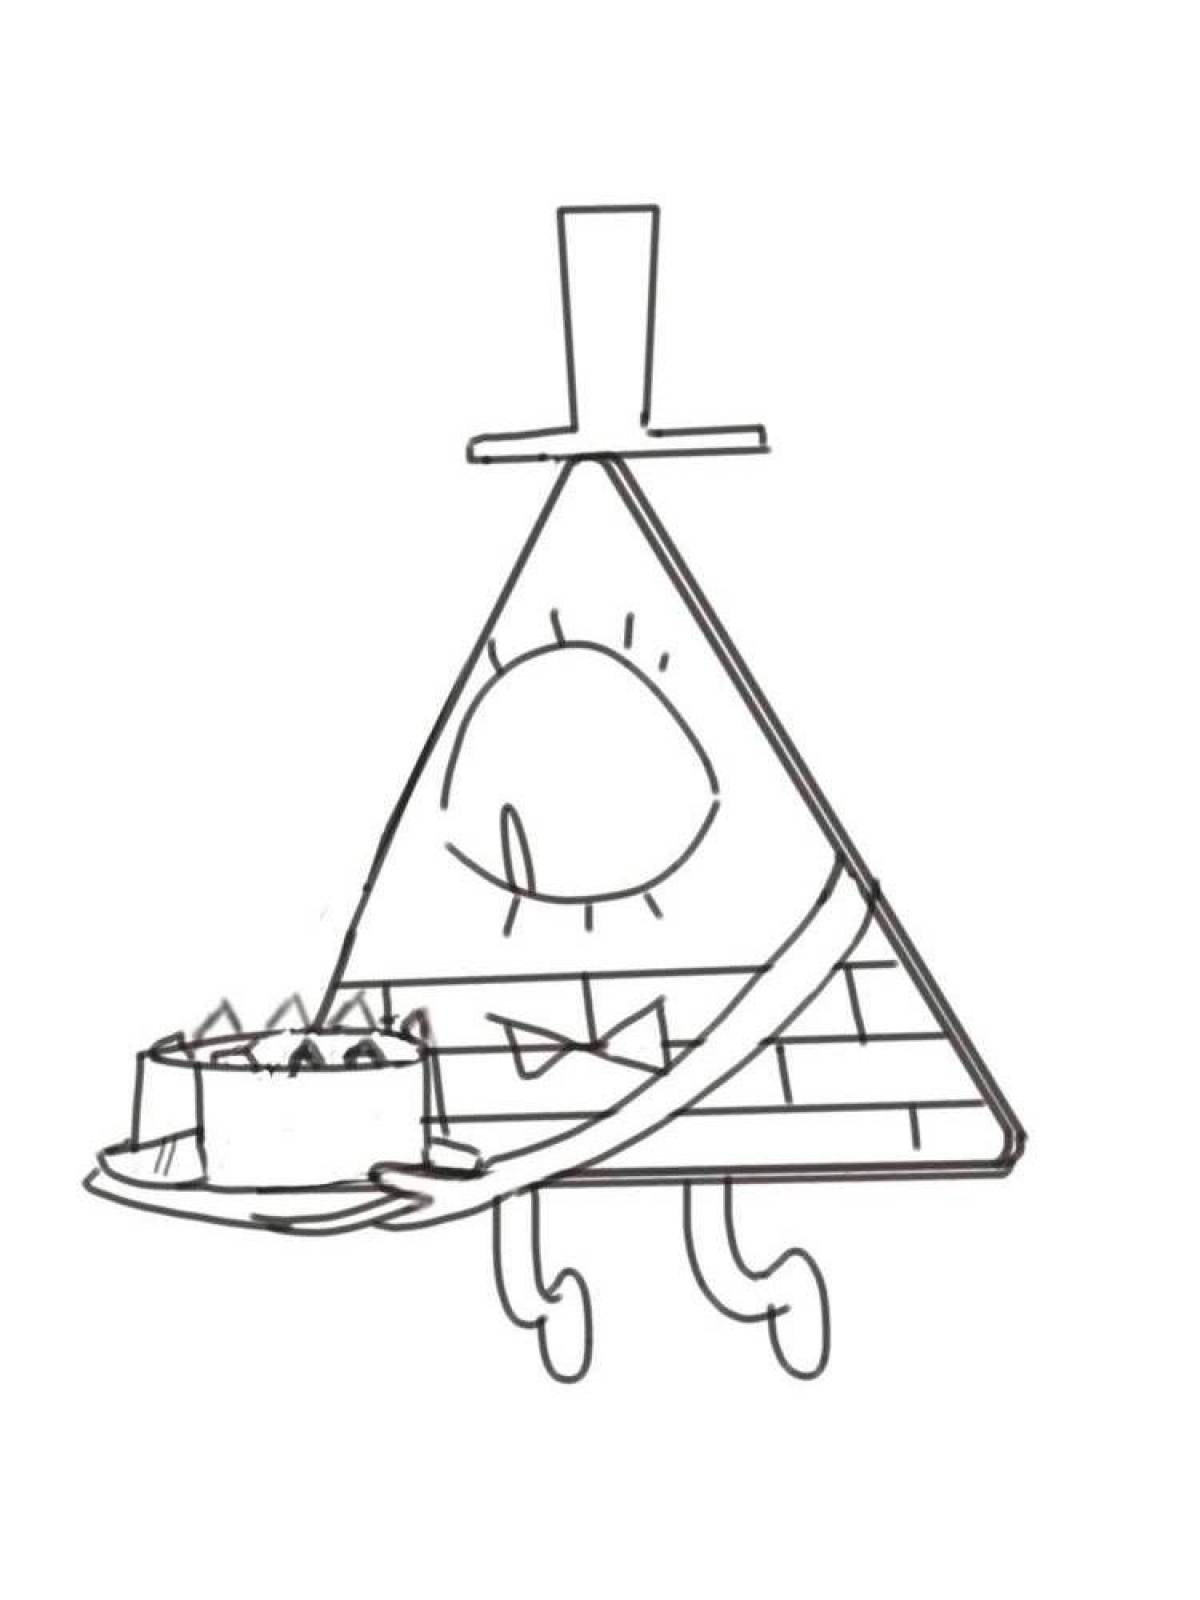 Coloring bill cipher